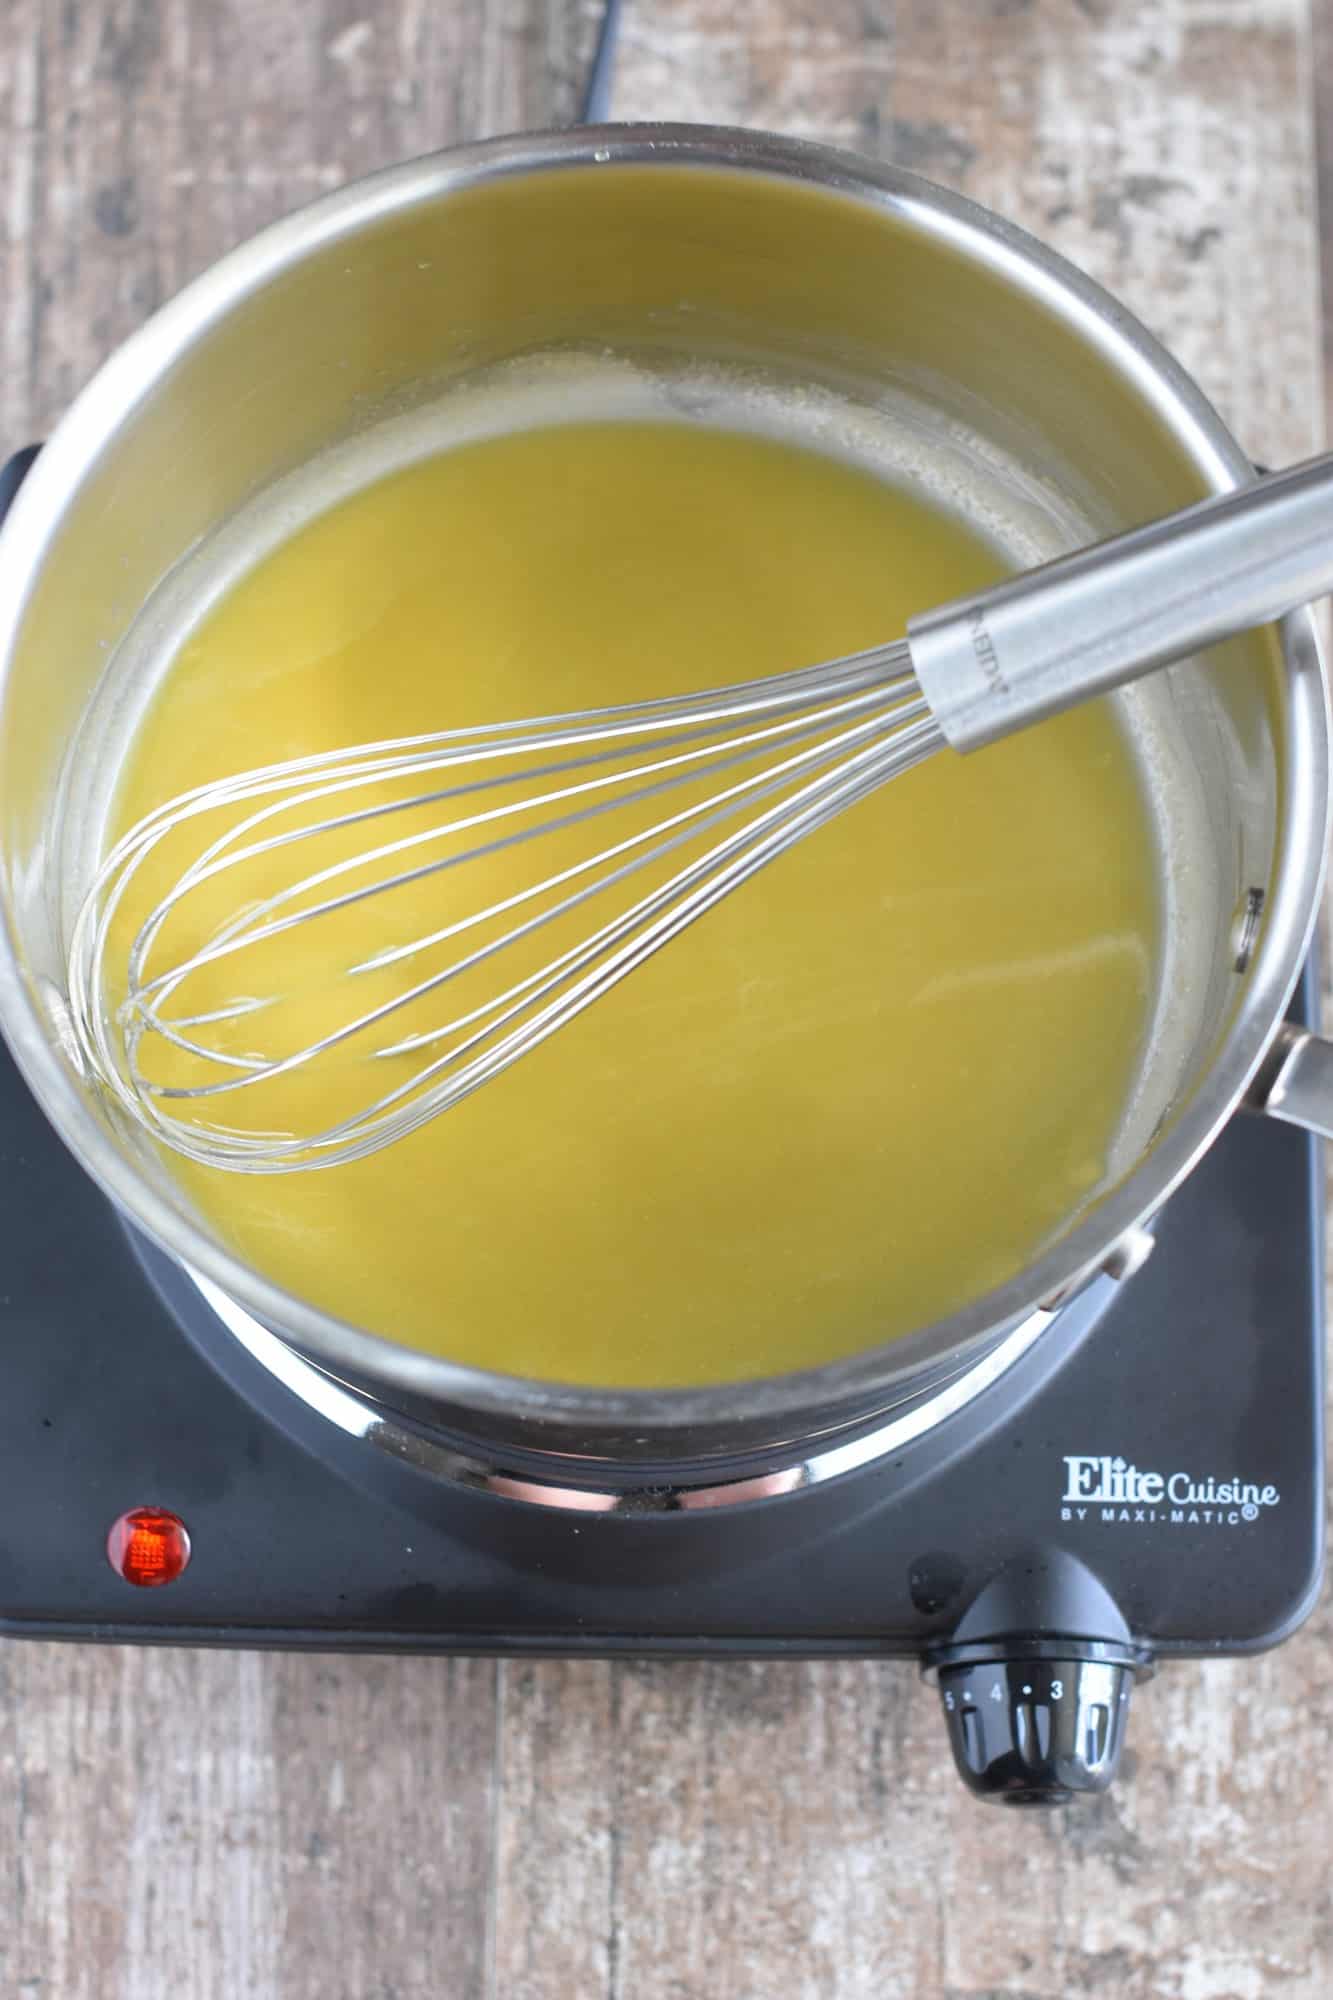 Chickpea flour whisked into the olive oil